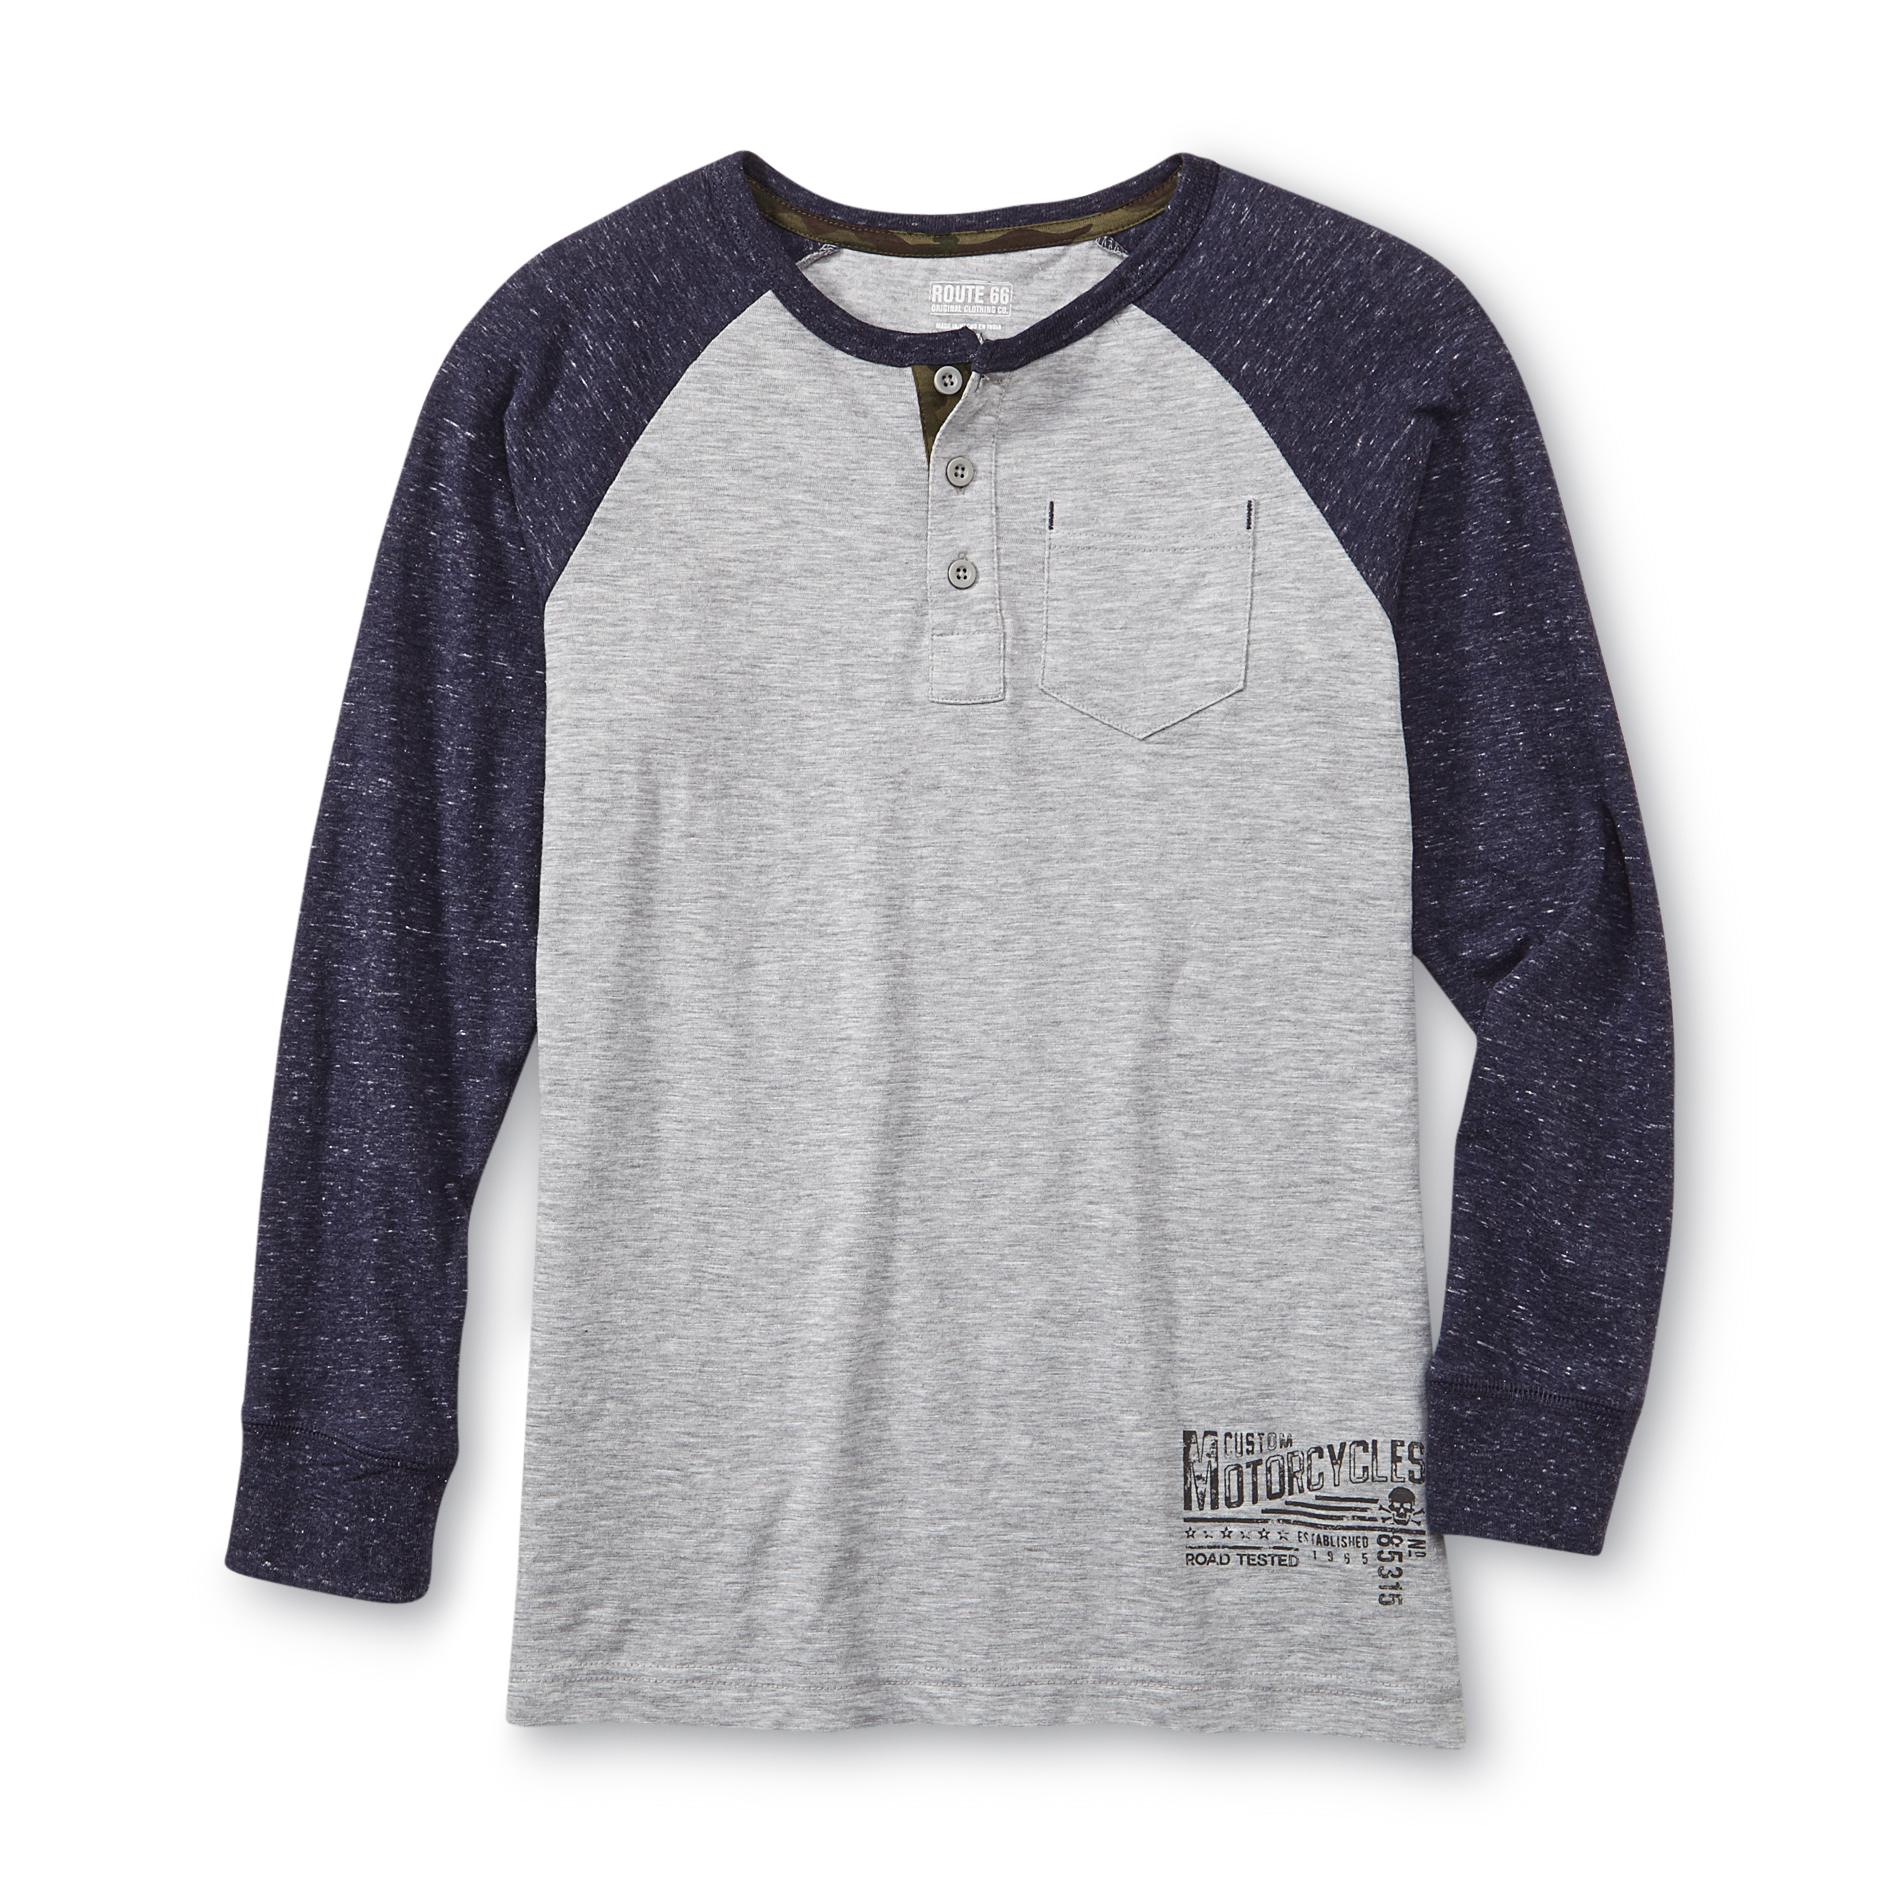 Route 66 Boy's Hooded Henley Shirt - Heathered